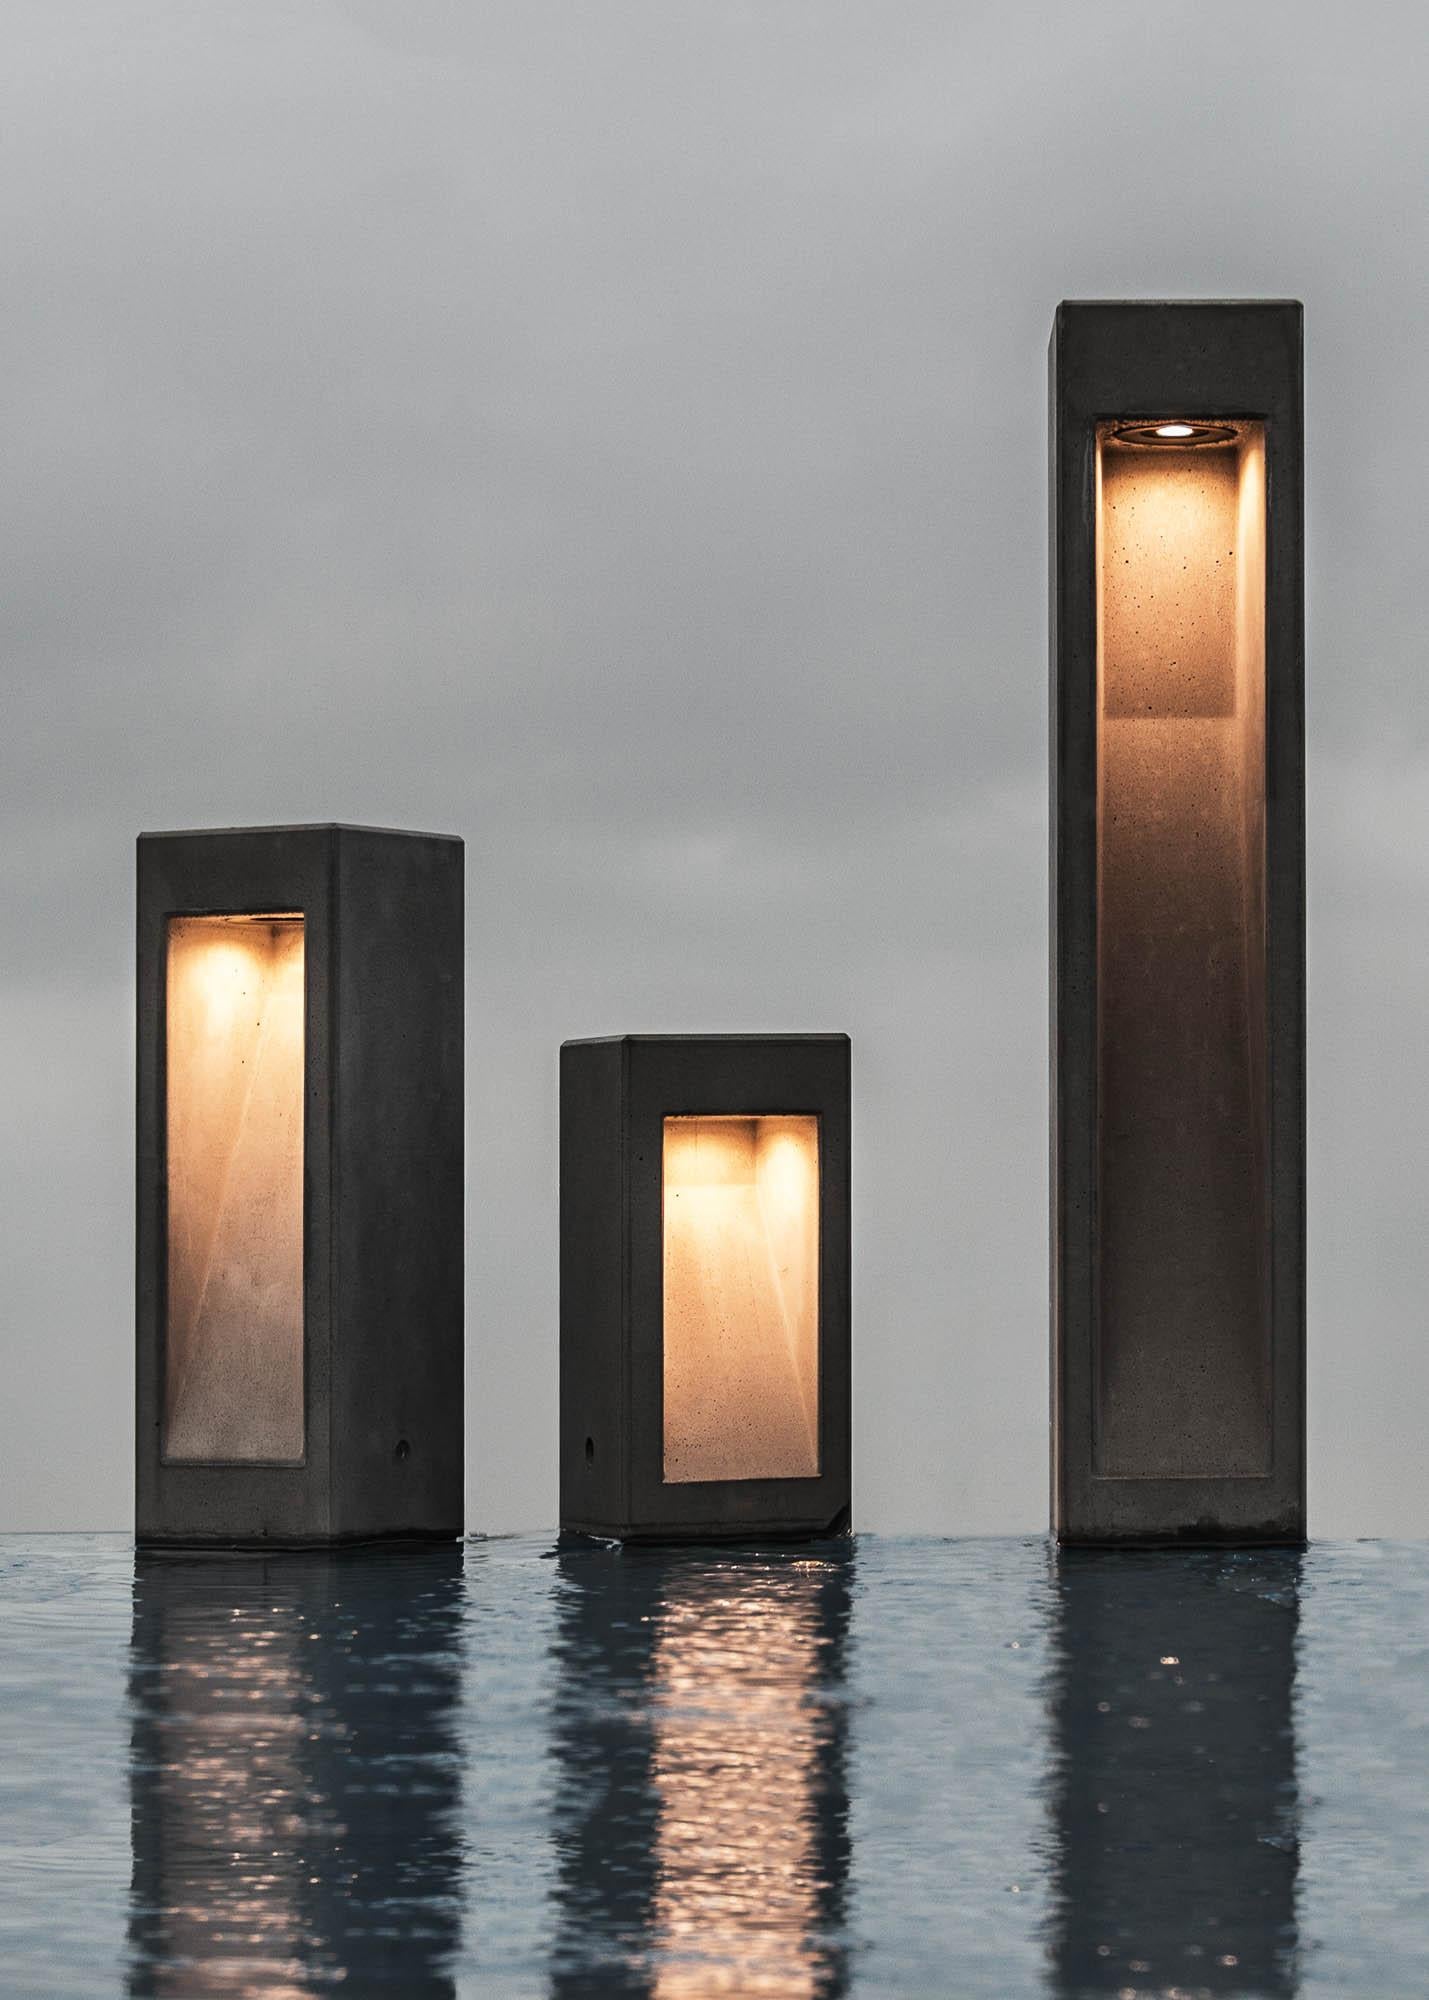 Cube M - outdoor lighting by Bentu Design

Concrete
Measures: 120 × 120 × H 350mm
7.6kg
Light source: AC Led 295lm 3000K AC 110-240V 50-60Hz 3W IP67 
Cord: 1m black

Bentu Design's furniture and lightings derive its uniqueness from the